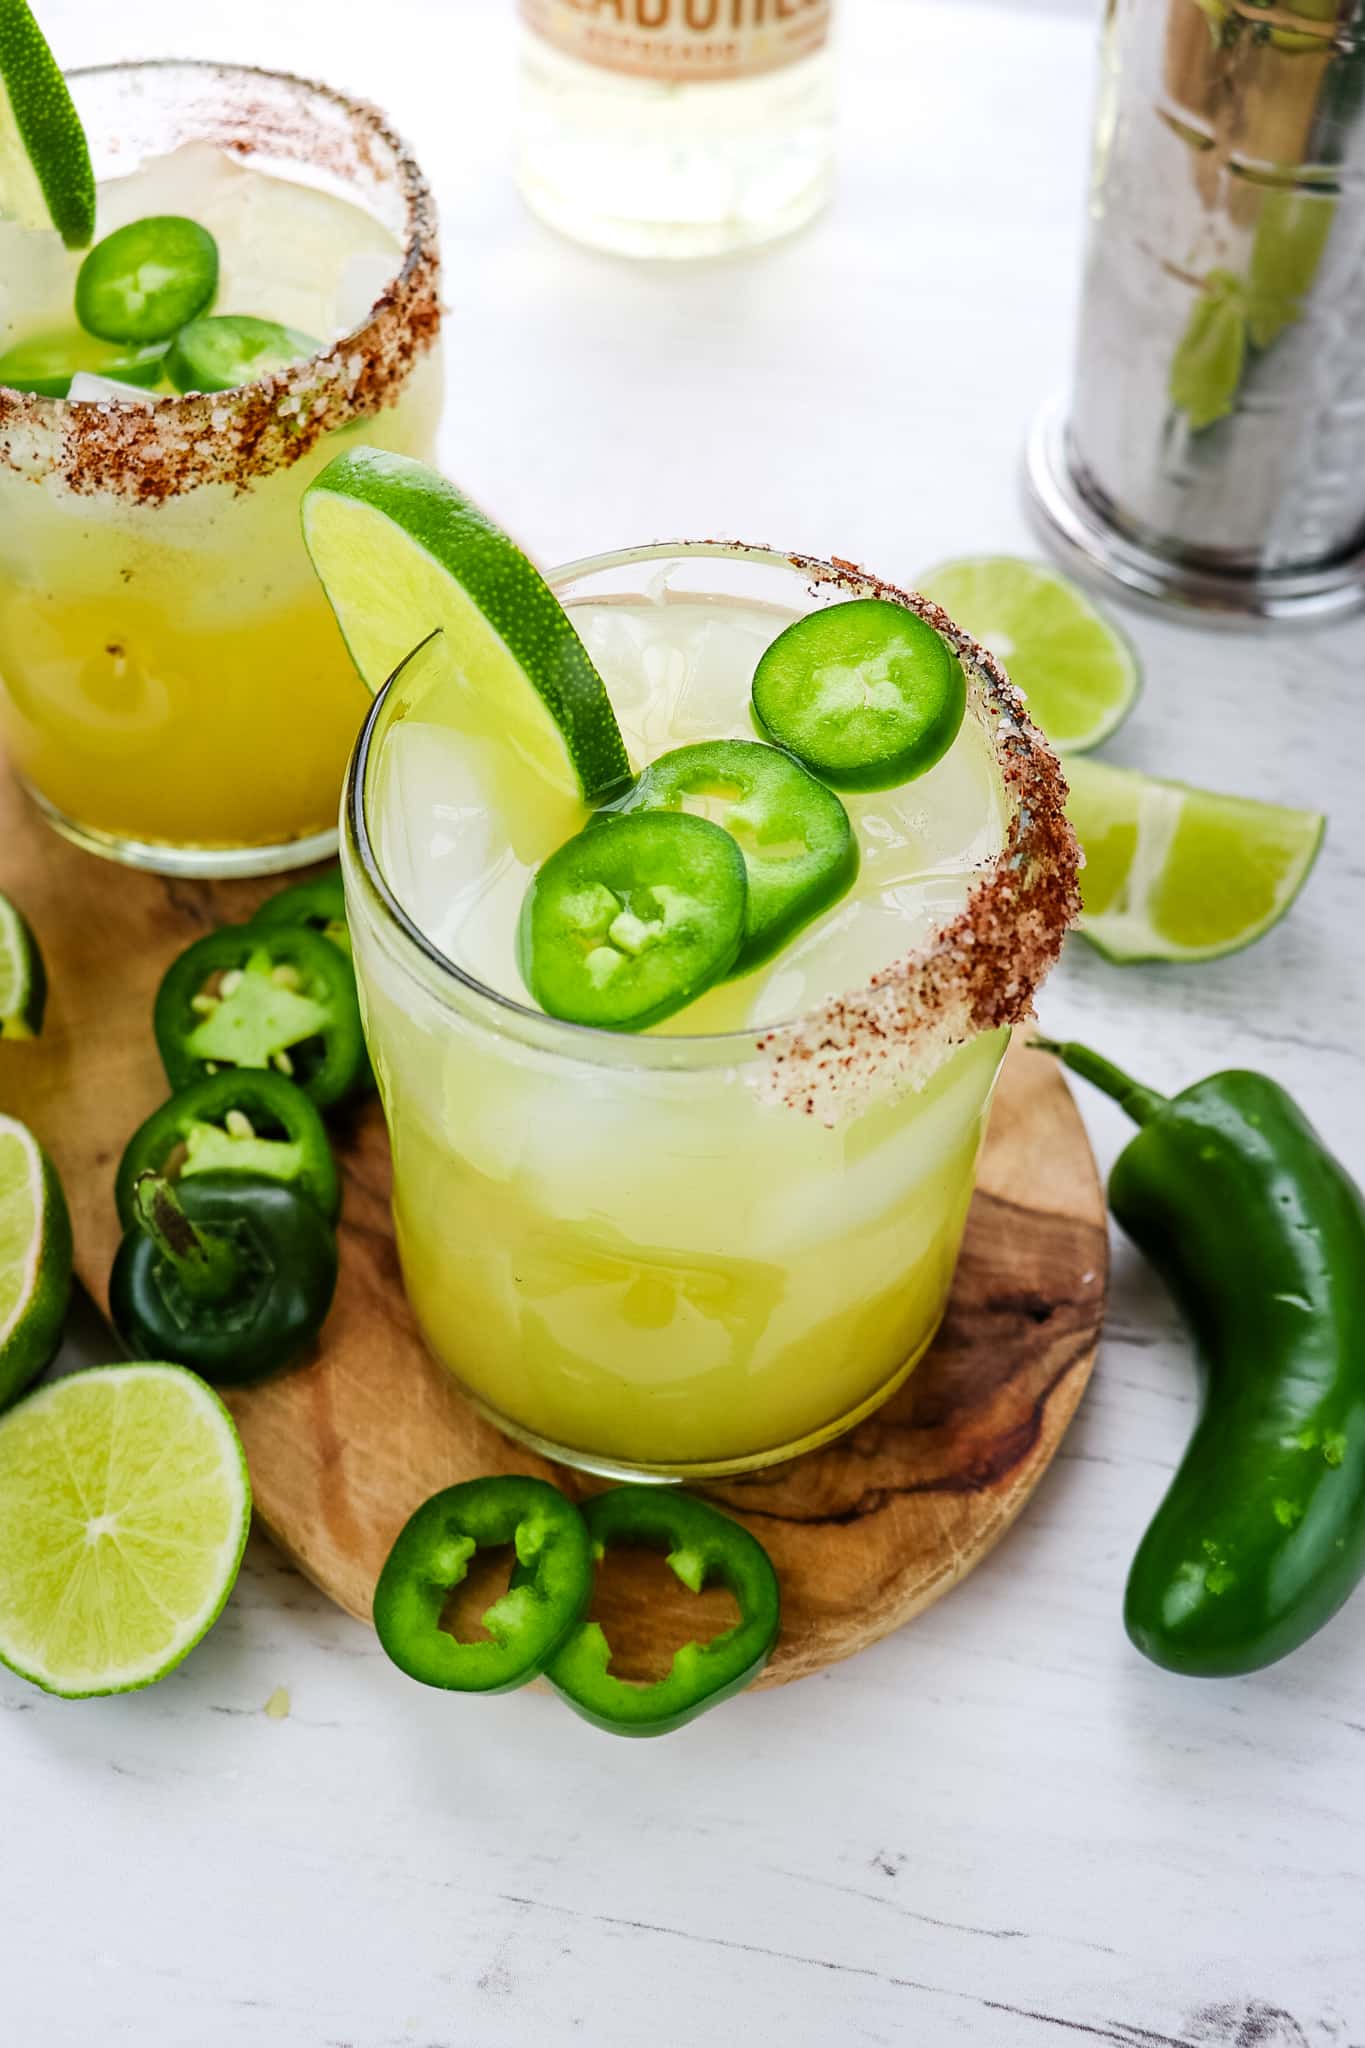 Jalapeno margarita recipe in two glasses garnished with lime and jalapeno slices and a salted rim with chili powder.